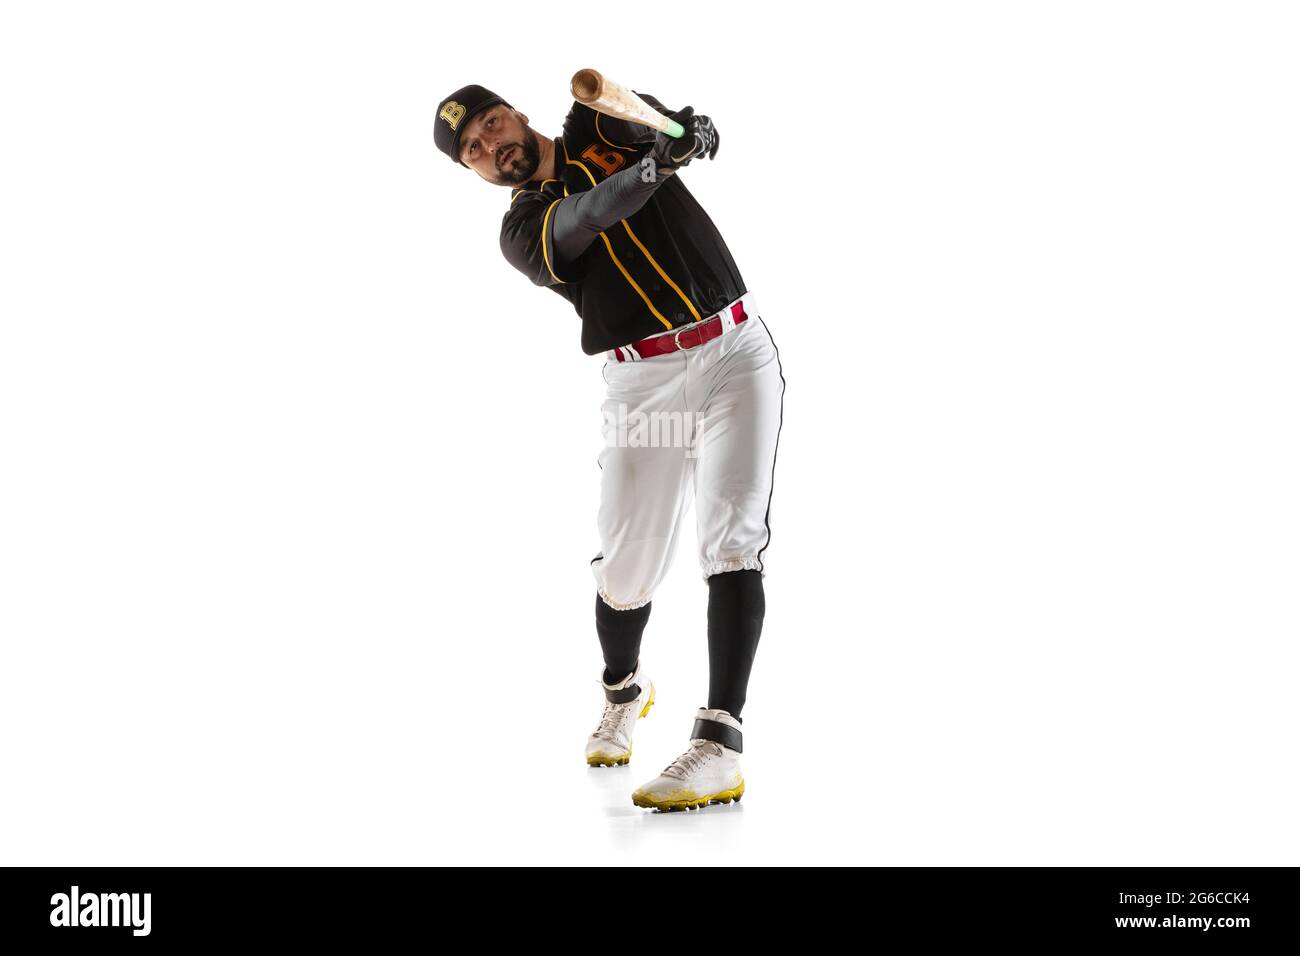 Baseball player, pitcher in a black white sports uniform practicing isolated on a white studio background. Stock Photo